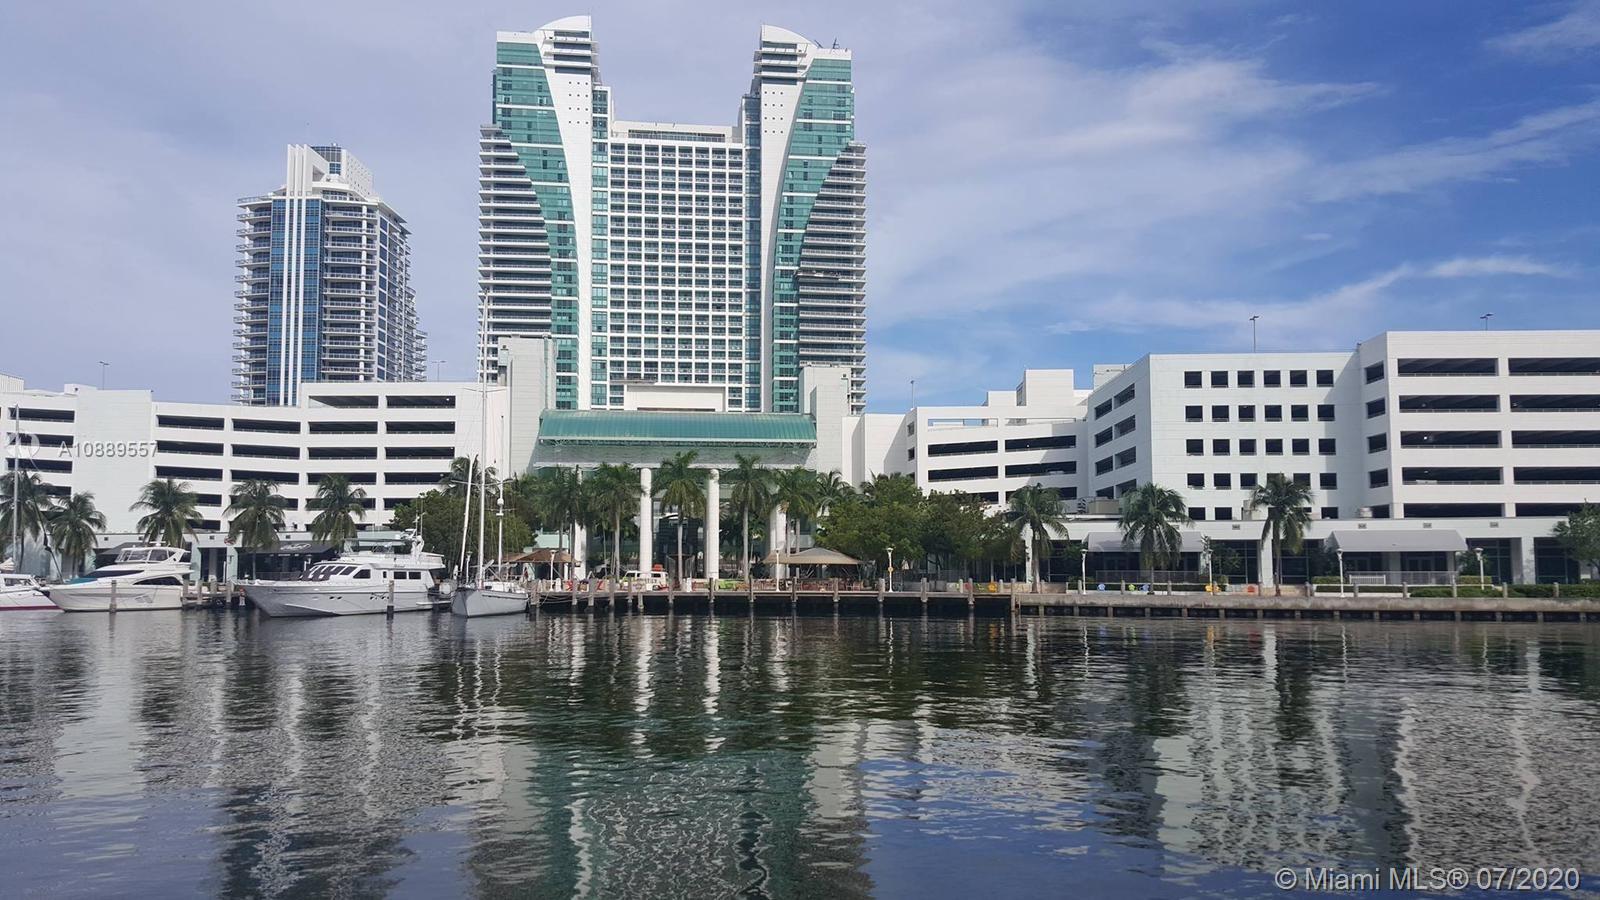 a view of a water with tall building